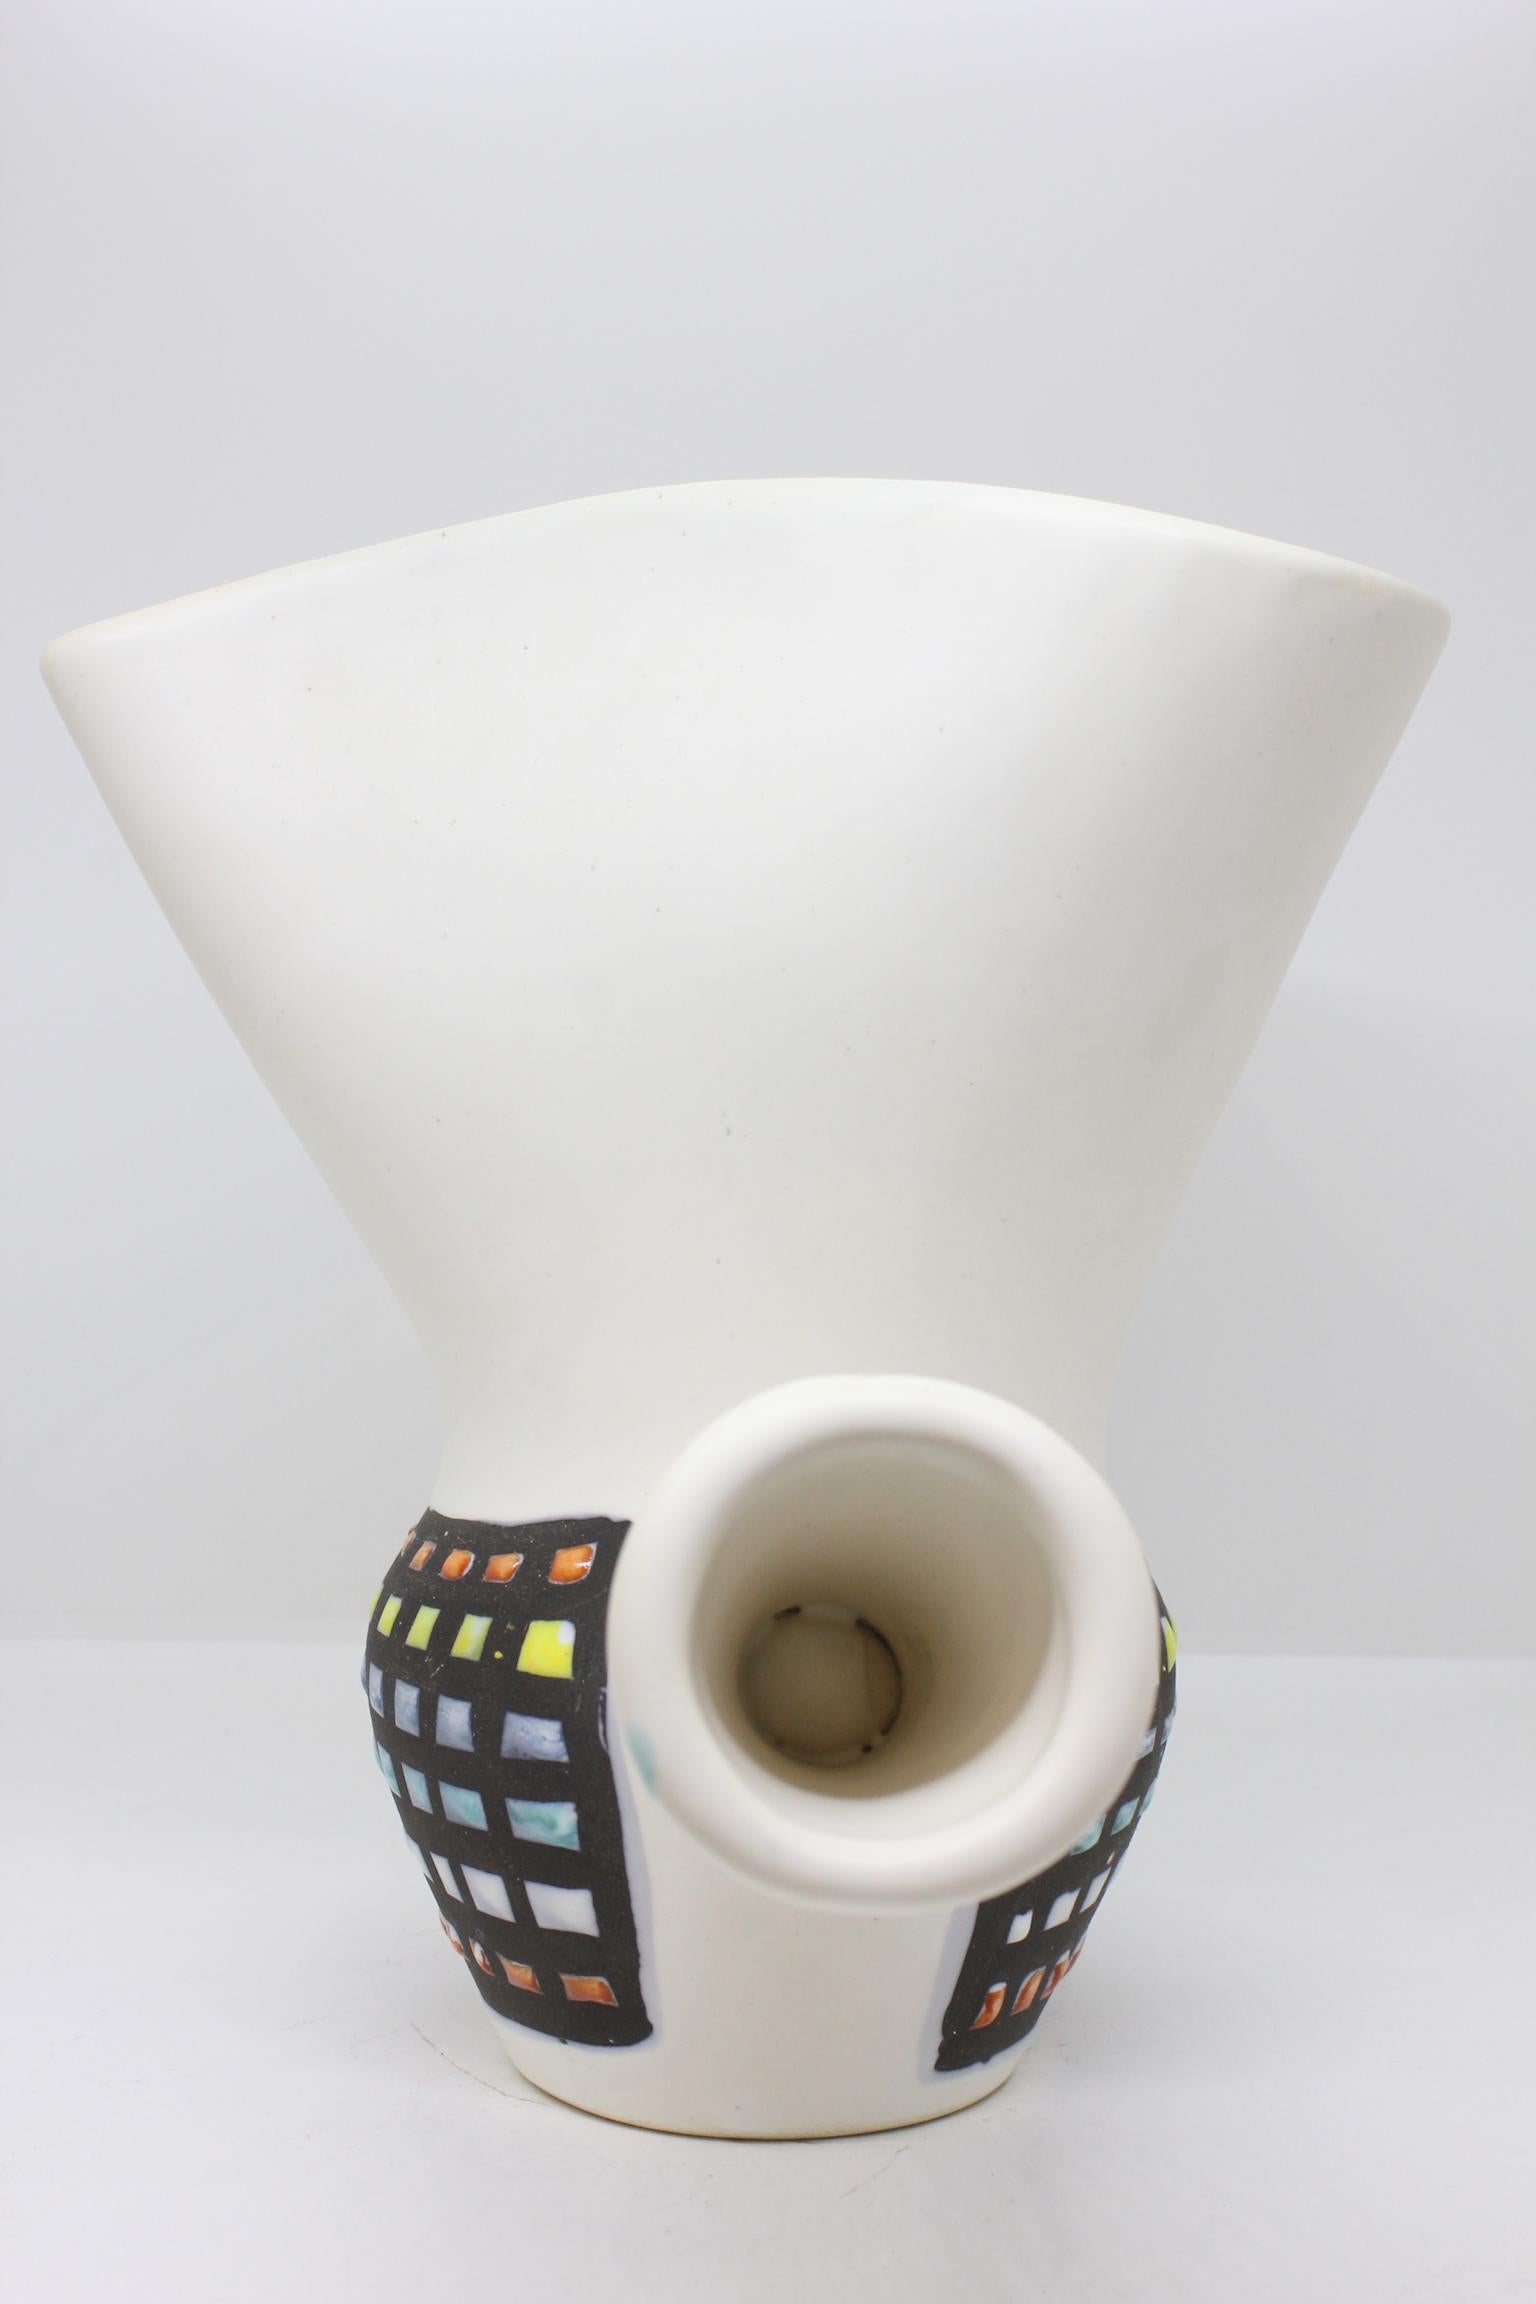 1950 vase by Roger Capron, Vallauris.
In perfect state.
Dimensions: Width 20cm, Depth 19cm, Height 22cm.